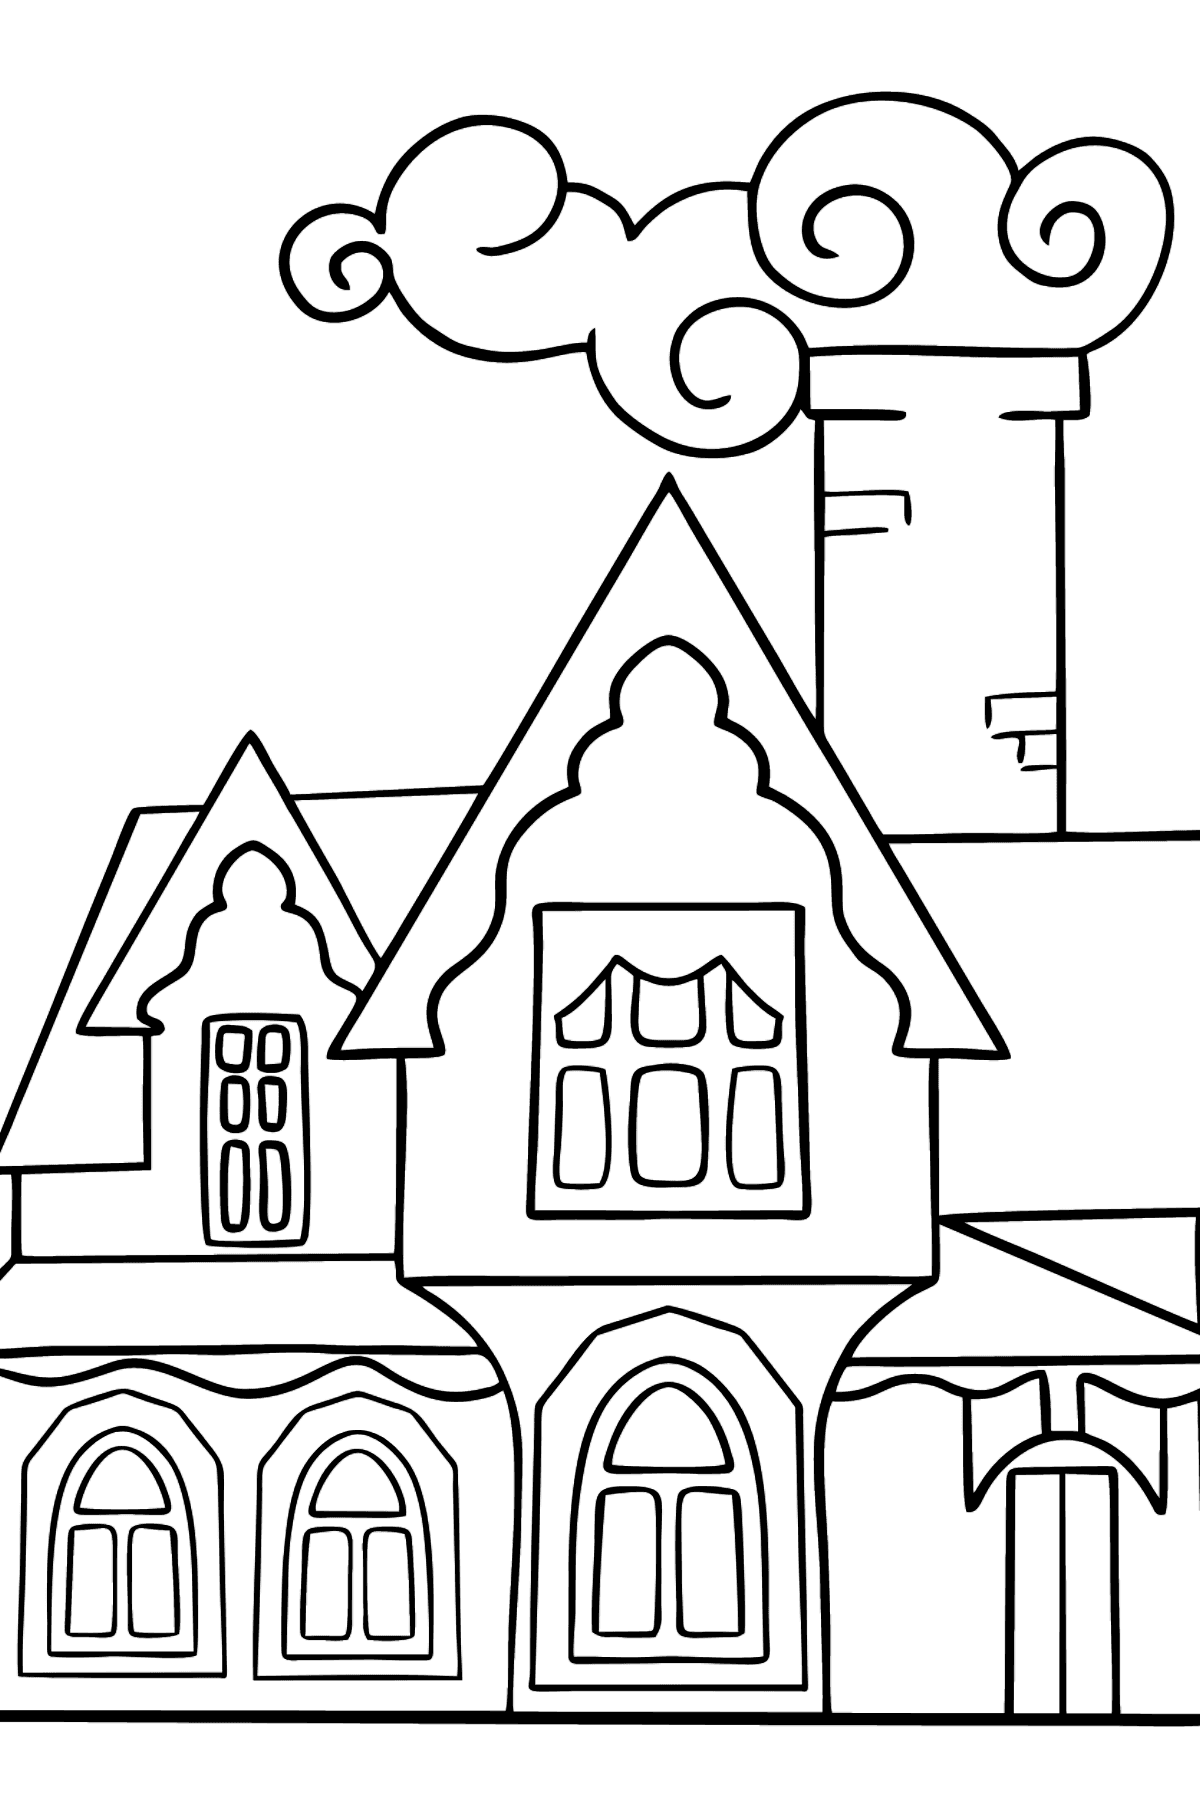 Miraculous House Coloring Page (Easy) - Coloring Pages for Kids